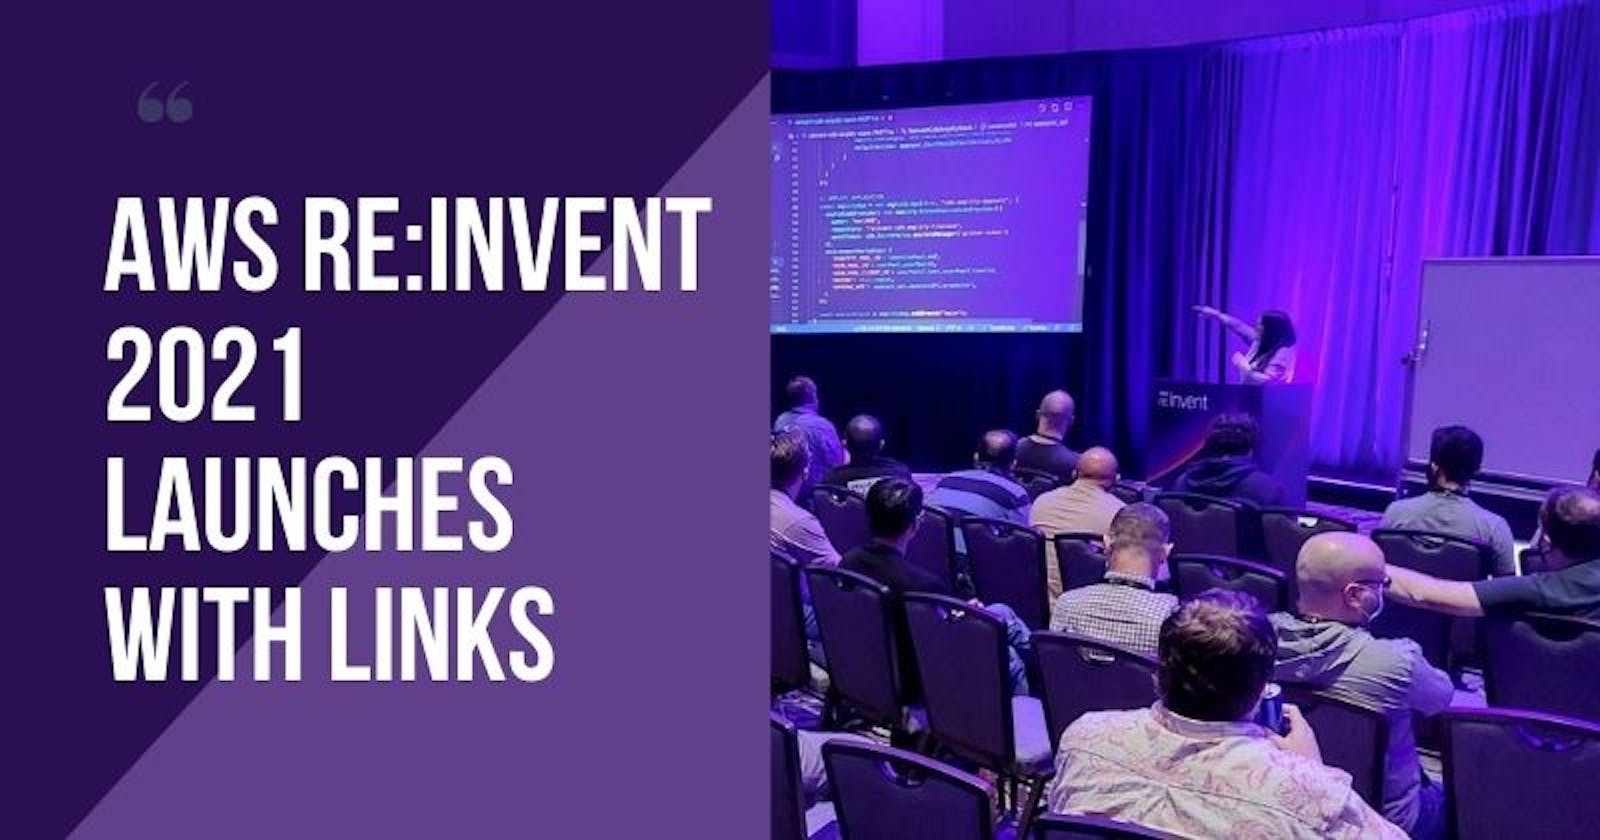 Links for all the AWS re:Invent 2021 announcements